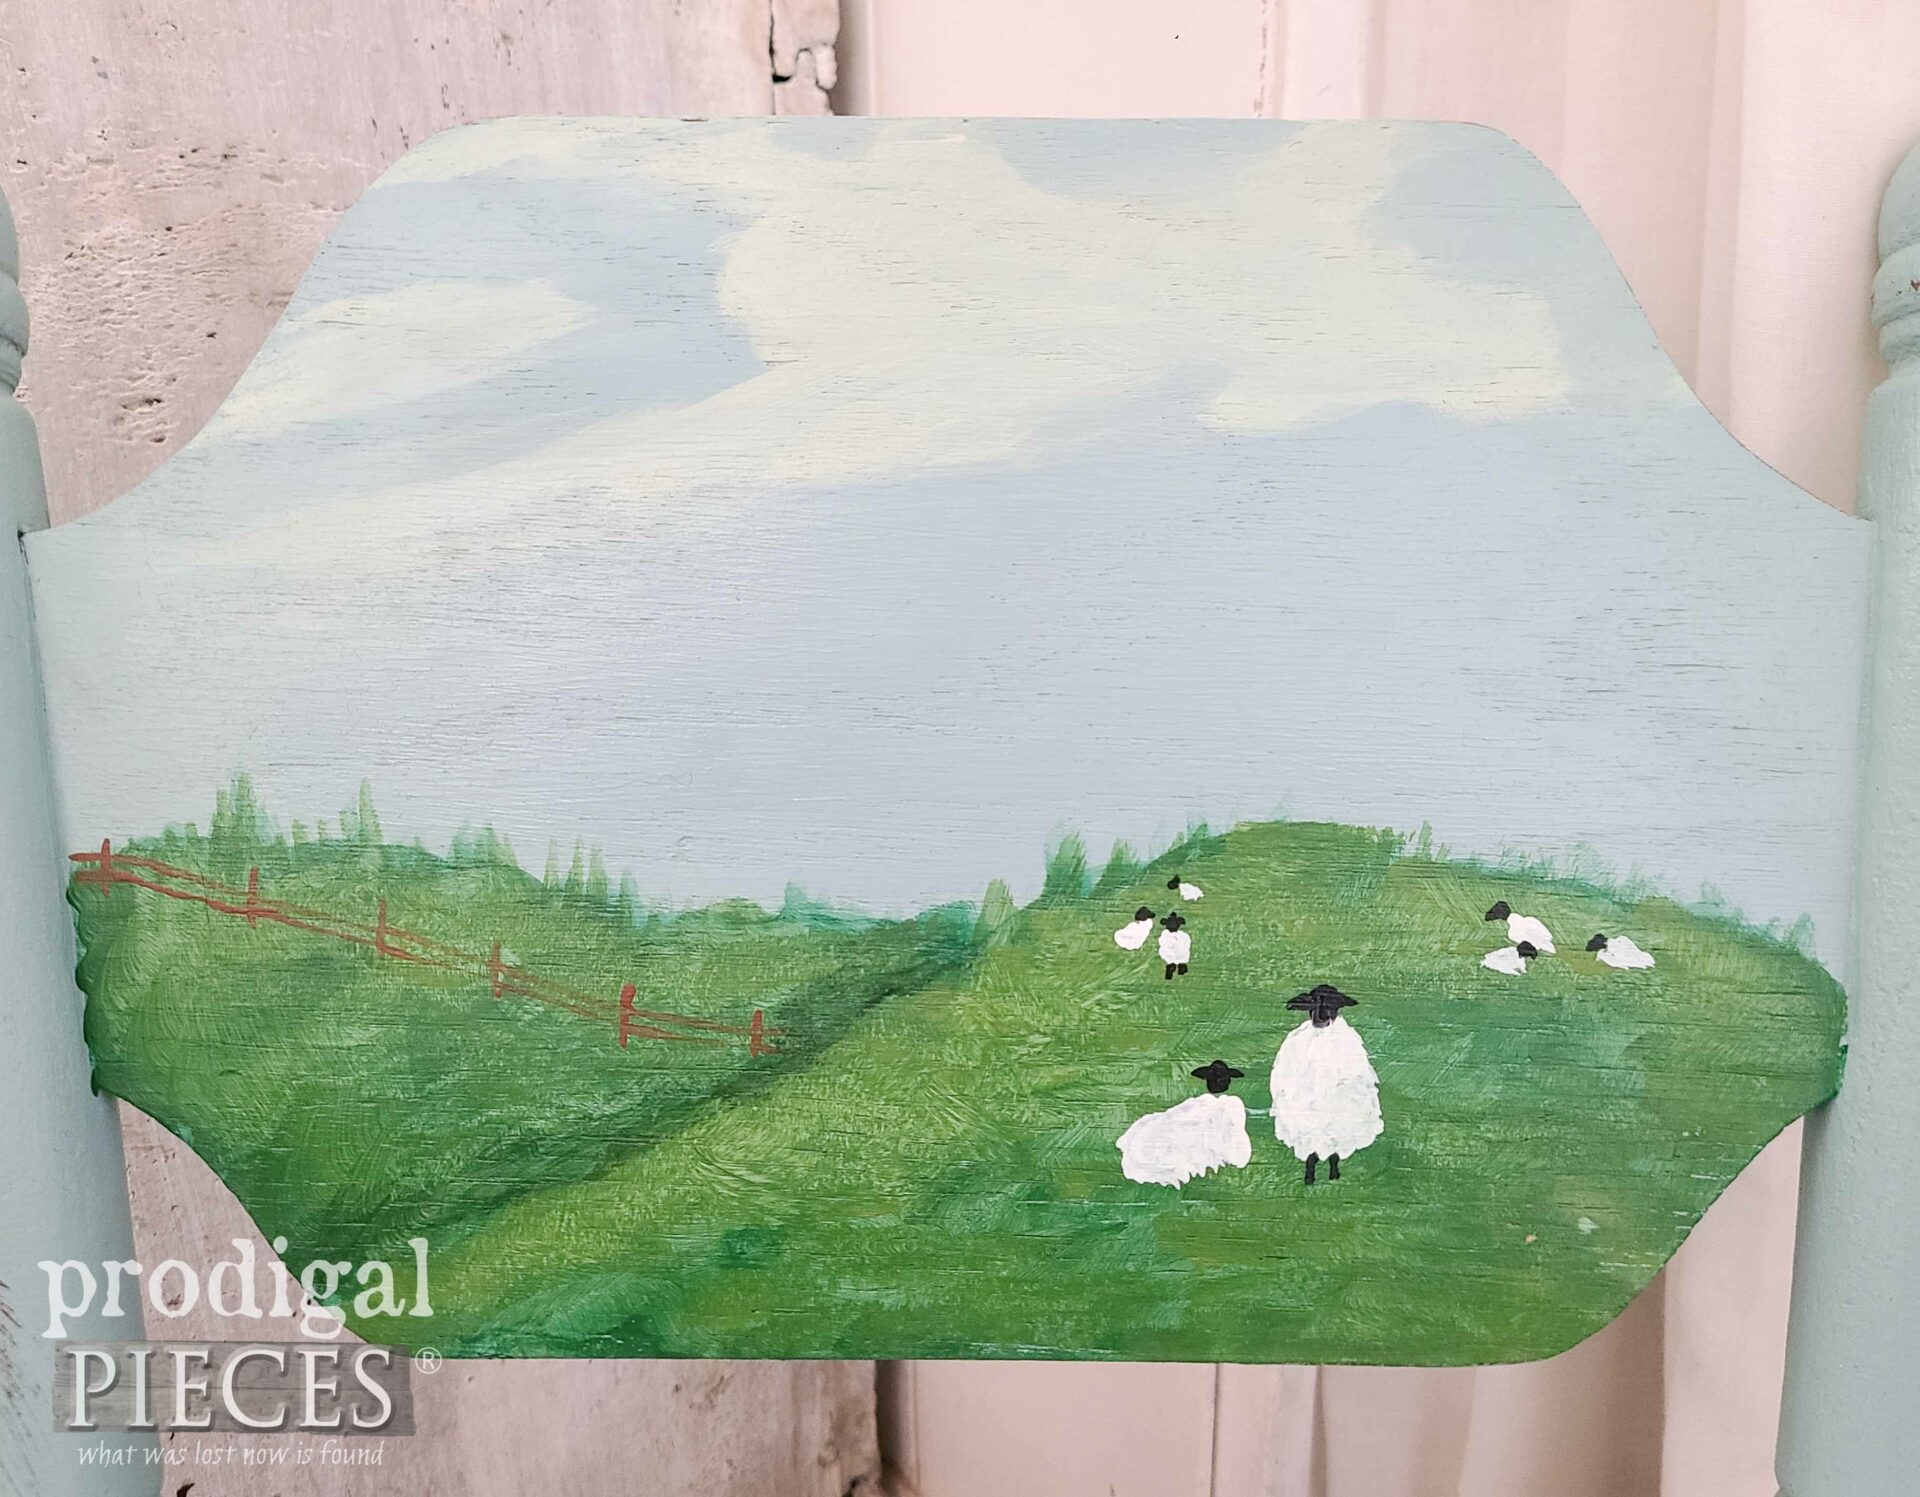 Hand-Painted Sheep on Rocking Chair by Larissa of Prodigal Pieces | prodigalpieces.com #prodigalpieces #kids #furniture #vintage